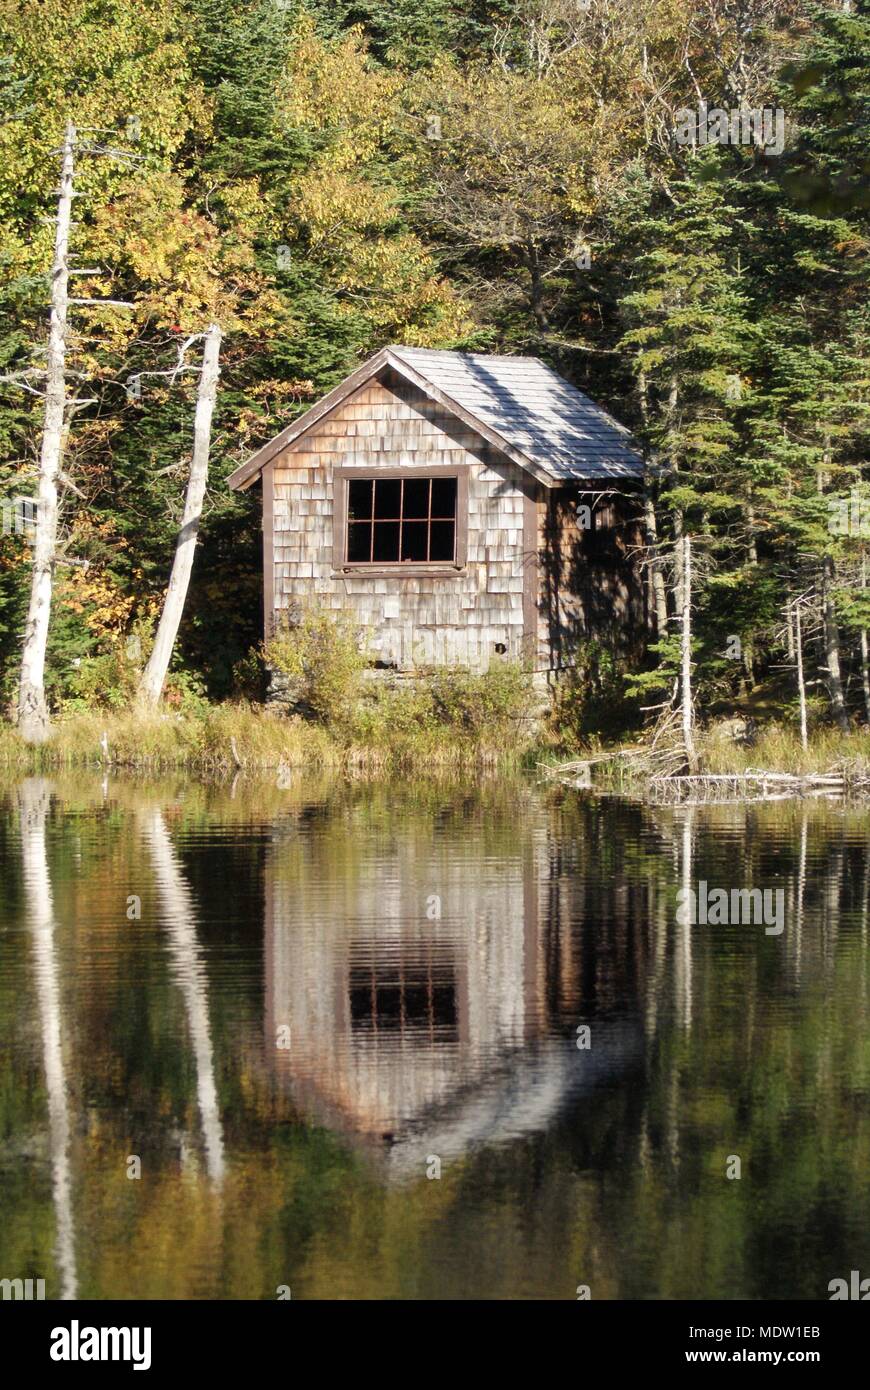 A simple wood shingled lakeside cabin hidden away in the birch forest Stock Photo